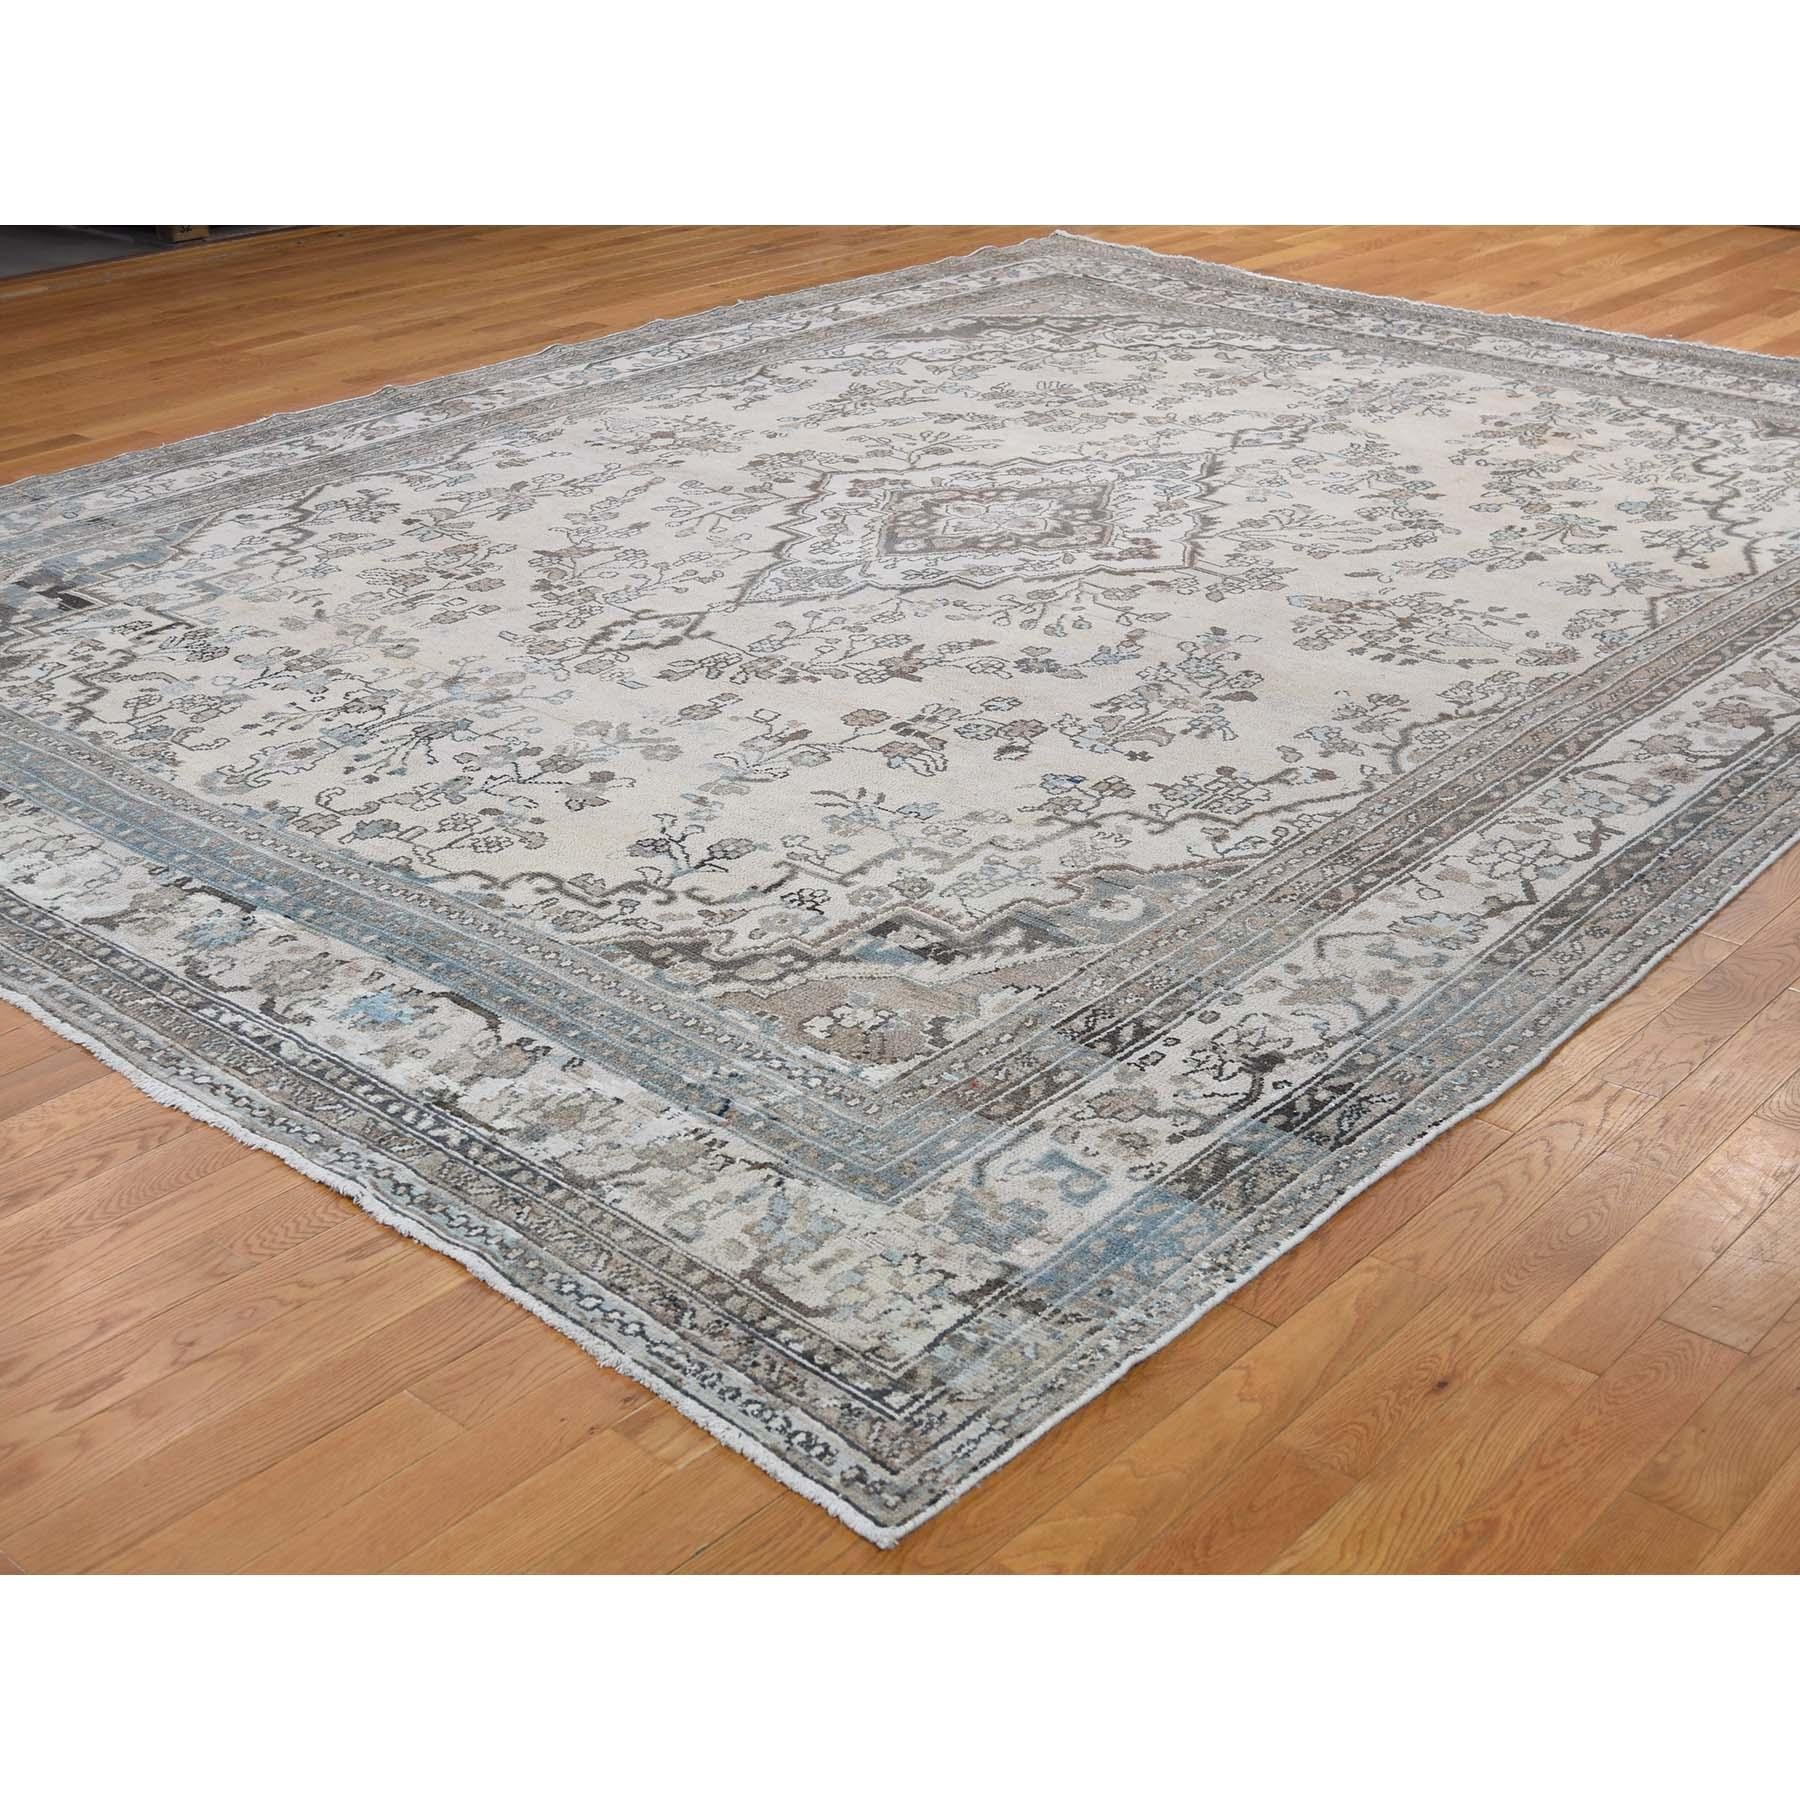 Afghan Vintage Hamadan with Grey and Blue Hand Knotted Oriental Rug